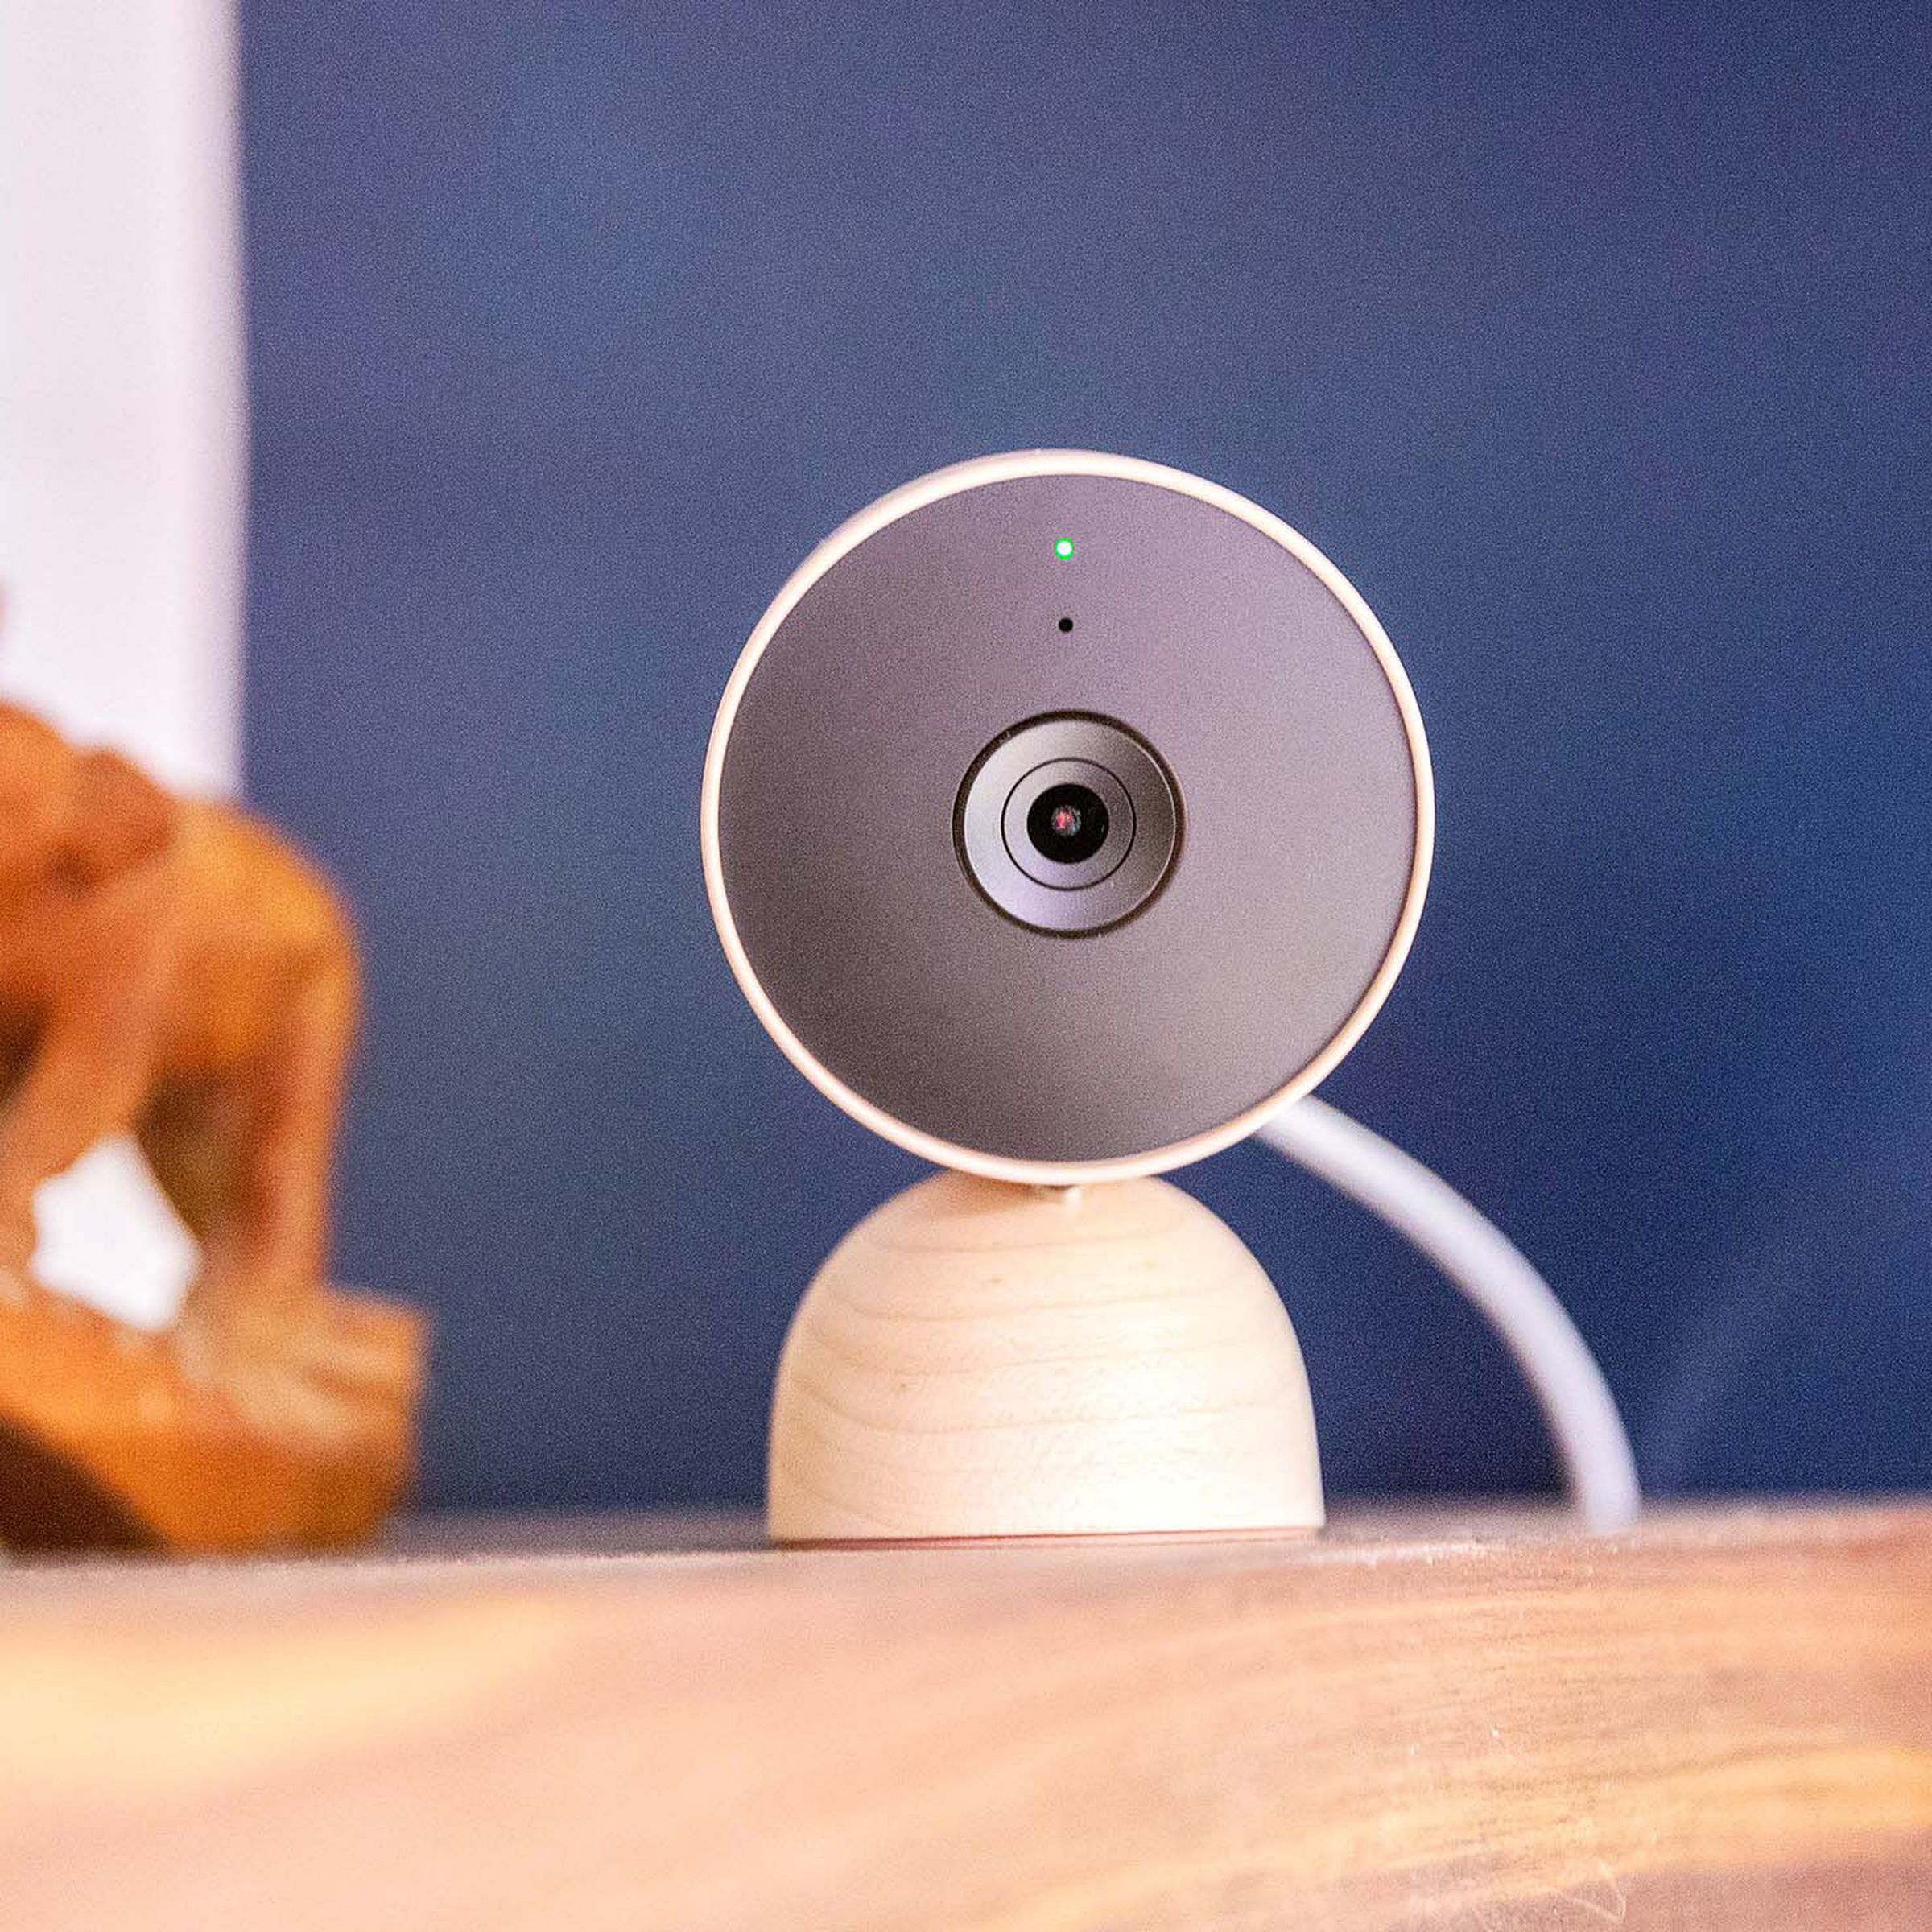 With a new update you can now view recorded footage from cameras like the Google Nest Cam (indoor, wired) on Google Home’s web interface.